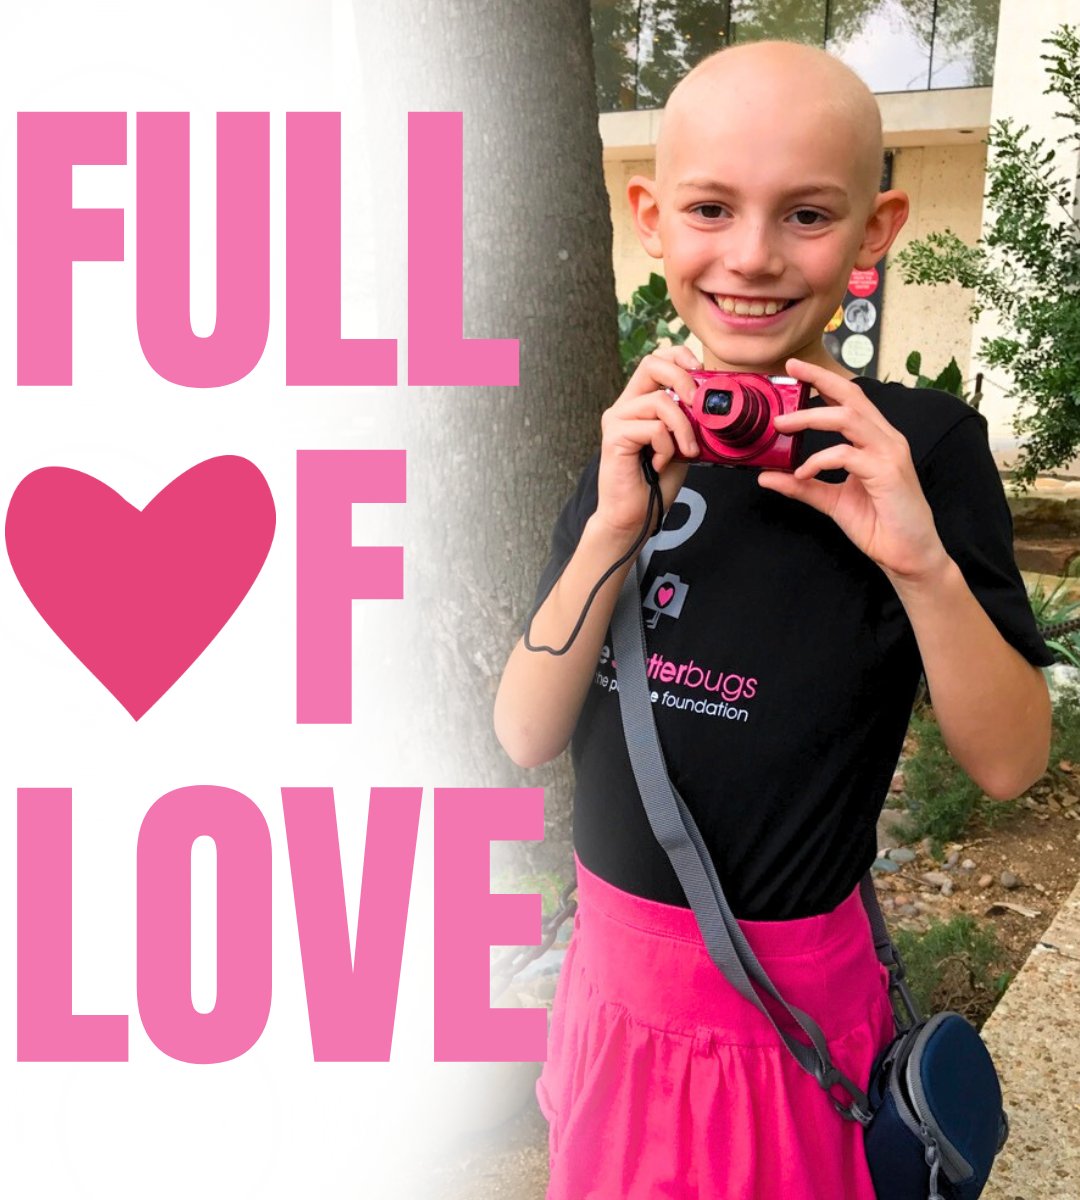 cue the hearts. Valentine's Day is next week and your gift of just $14/month delivers hope, joy + healing to kids with cancer. Love matters. Will you show your kindness? Join The Kindhearted monthly givers today: tinyurl.com/JoinKindhearted